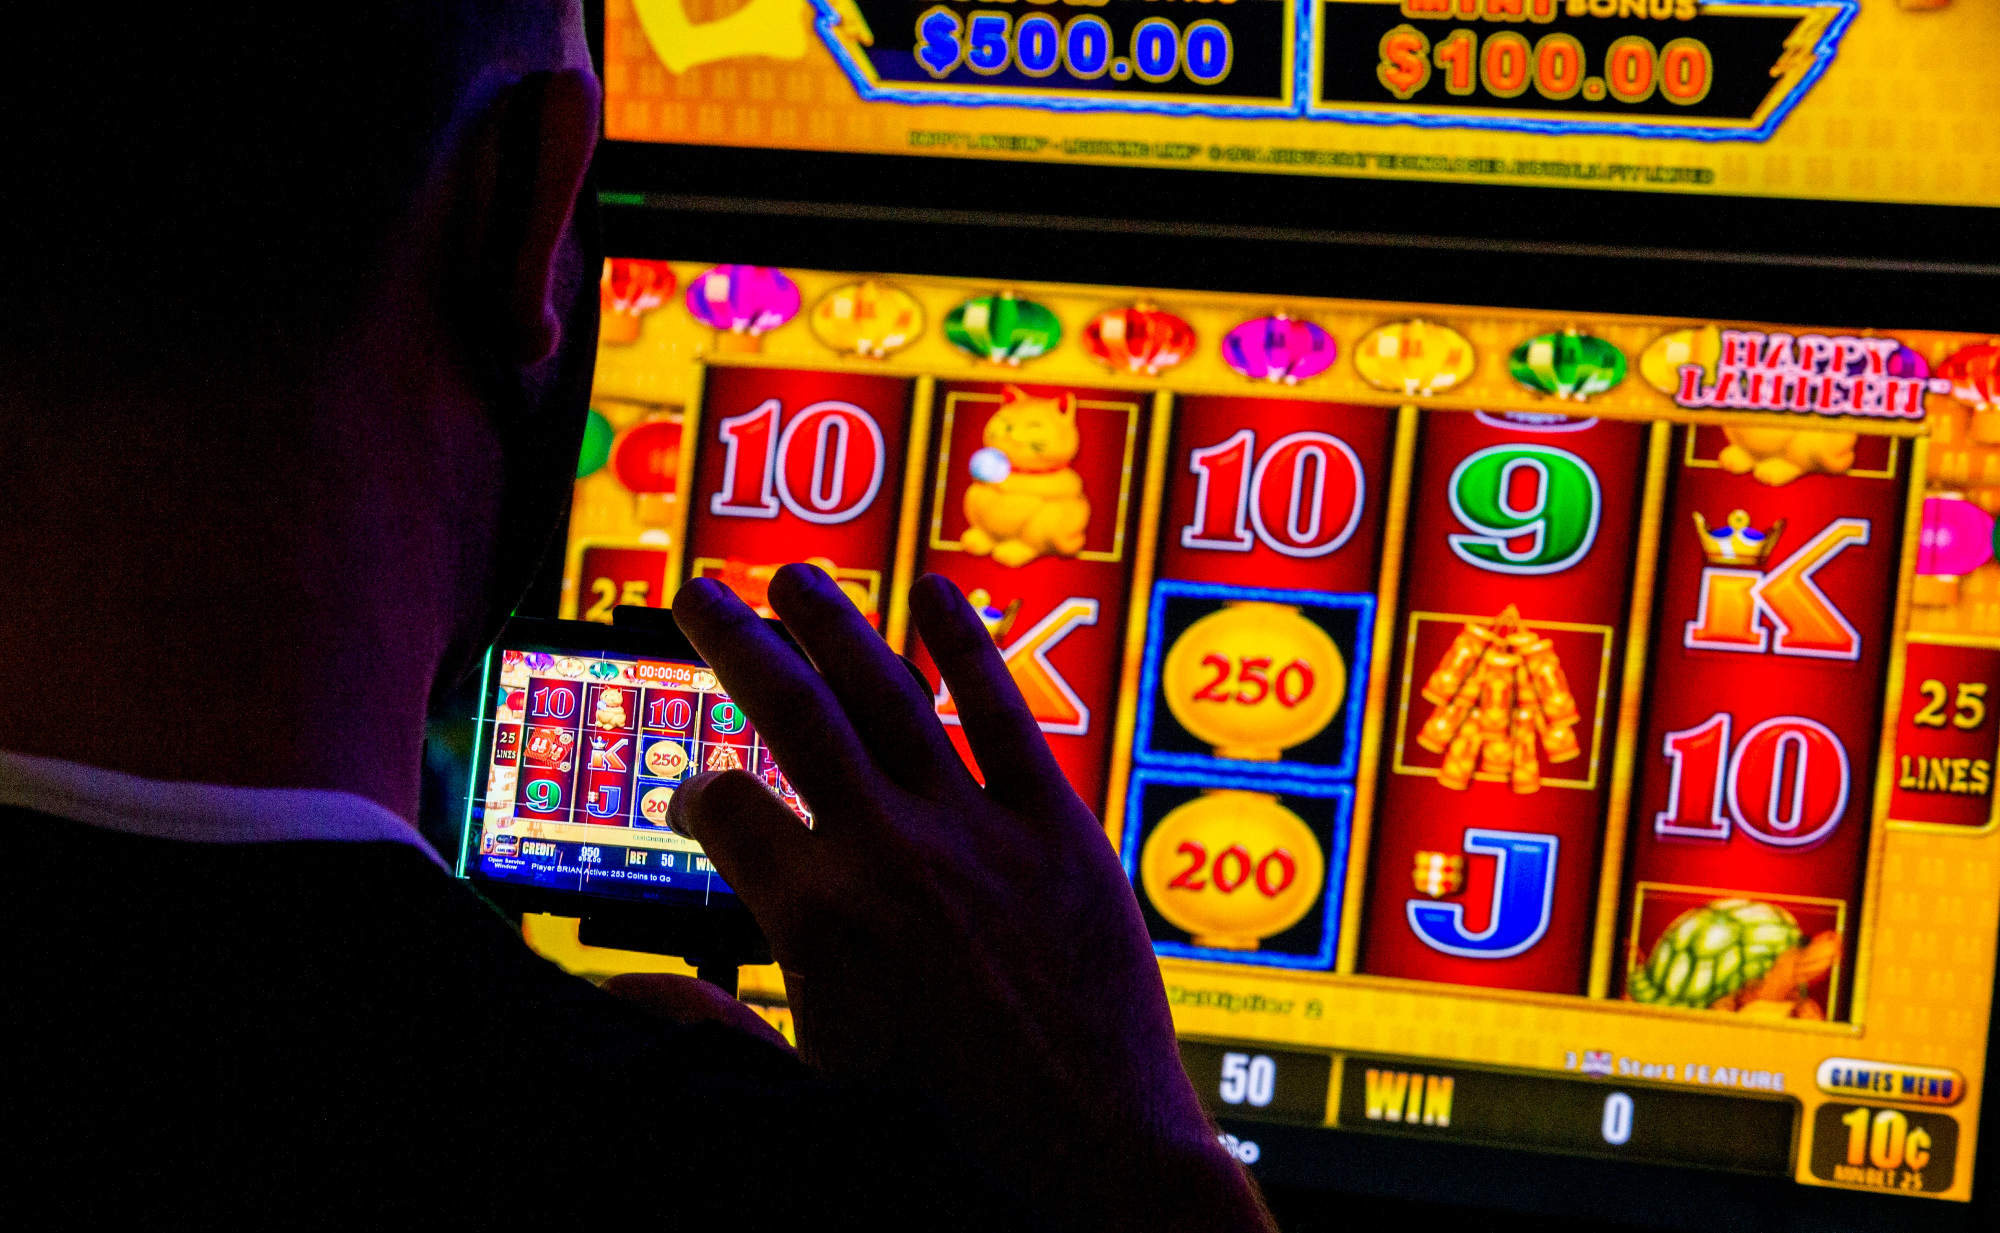 Play Slots at Online Casinos can be a fun some free time